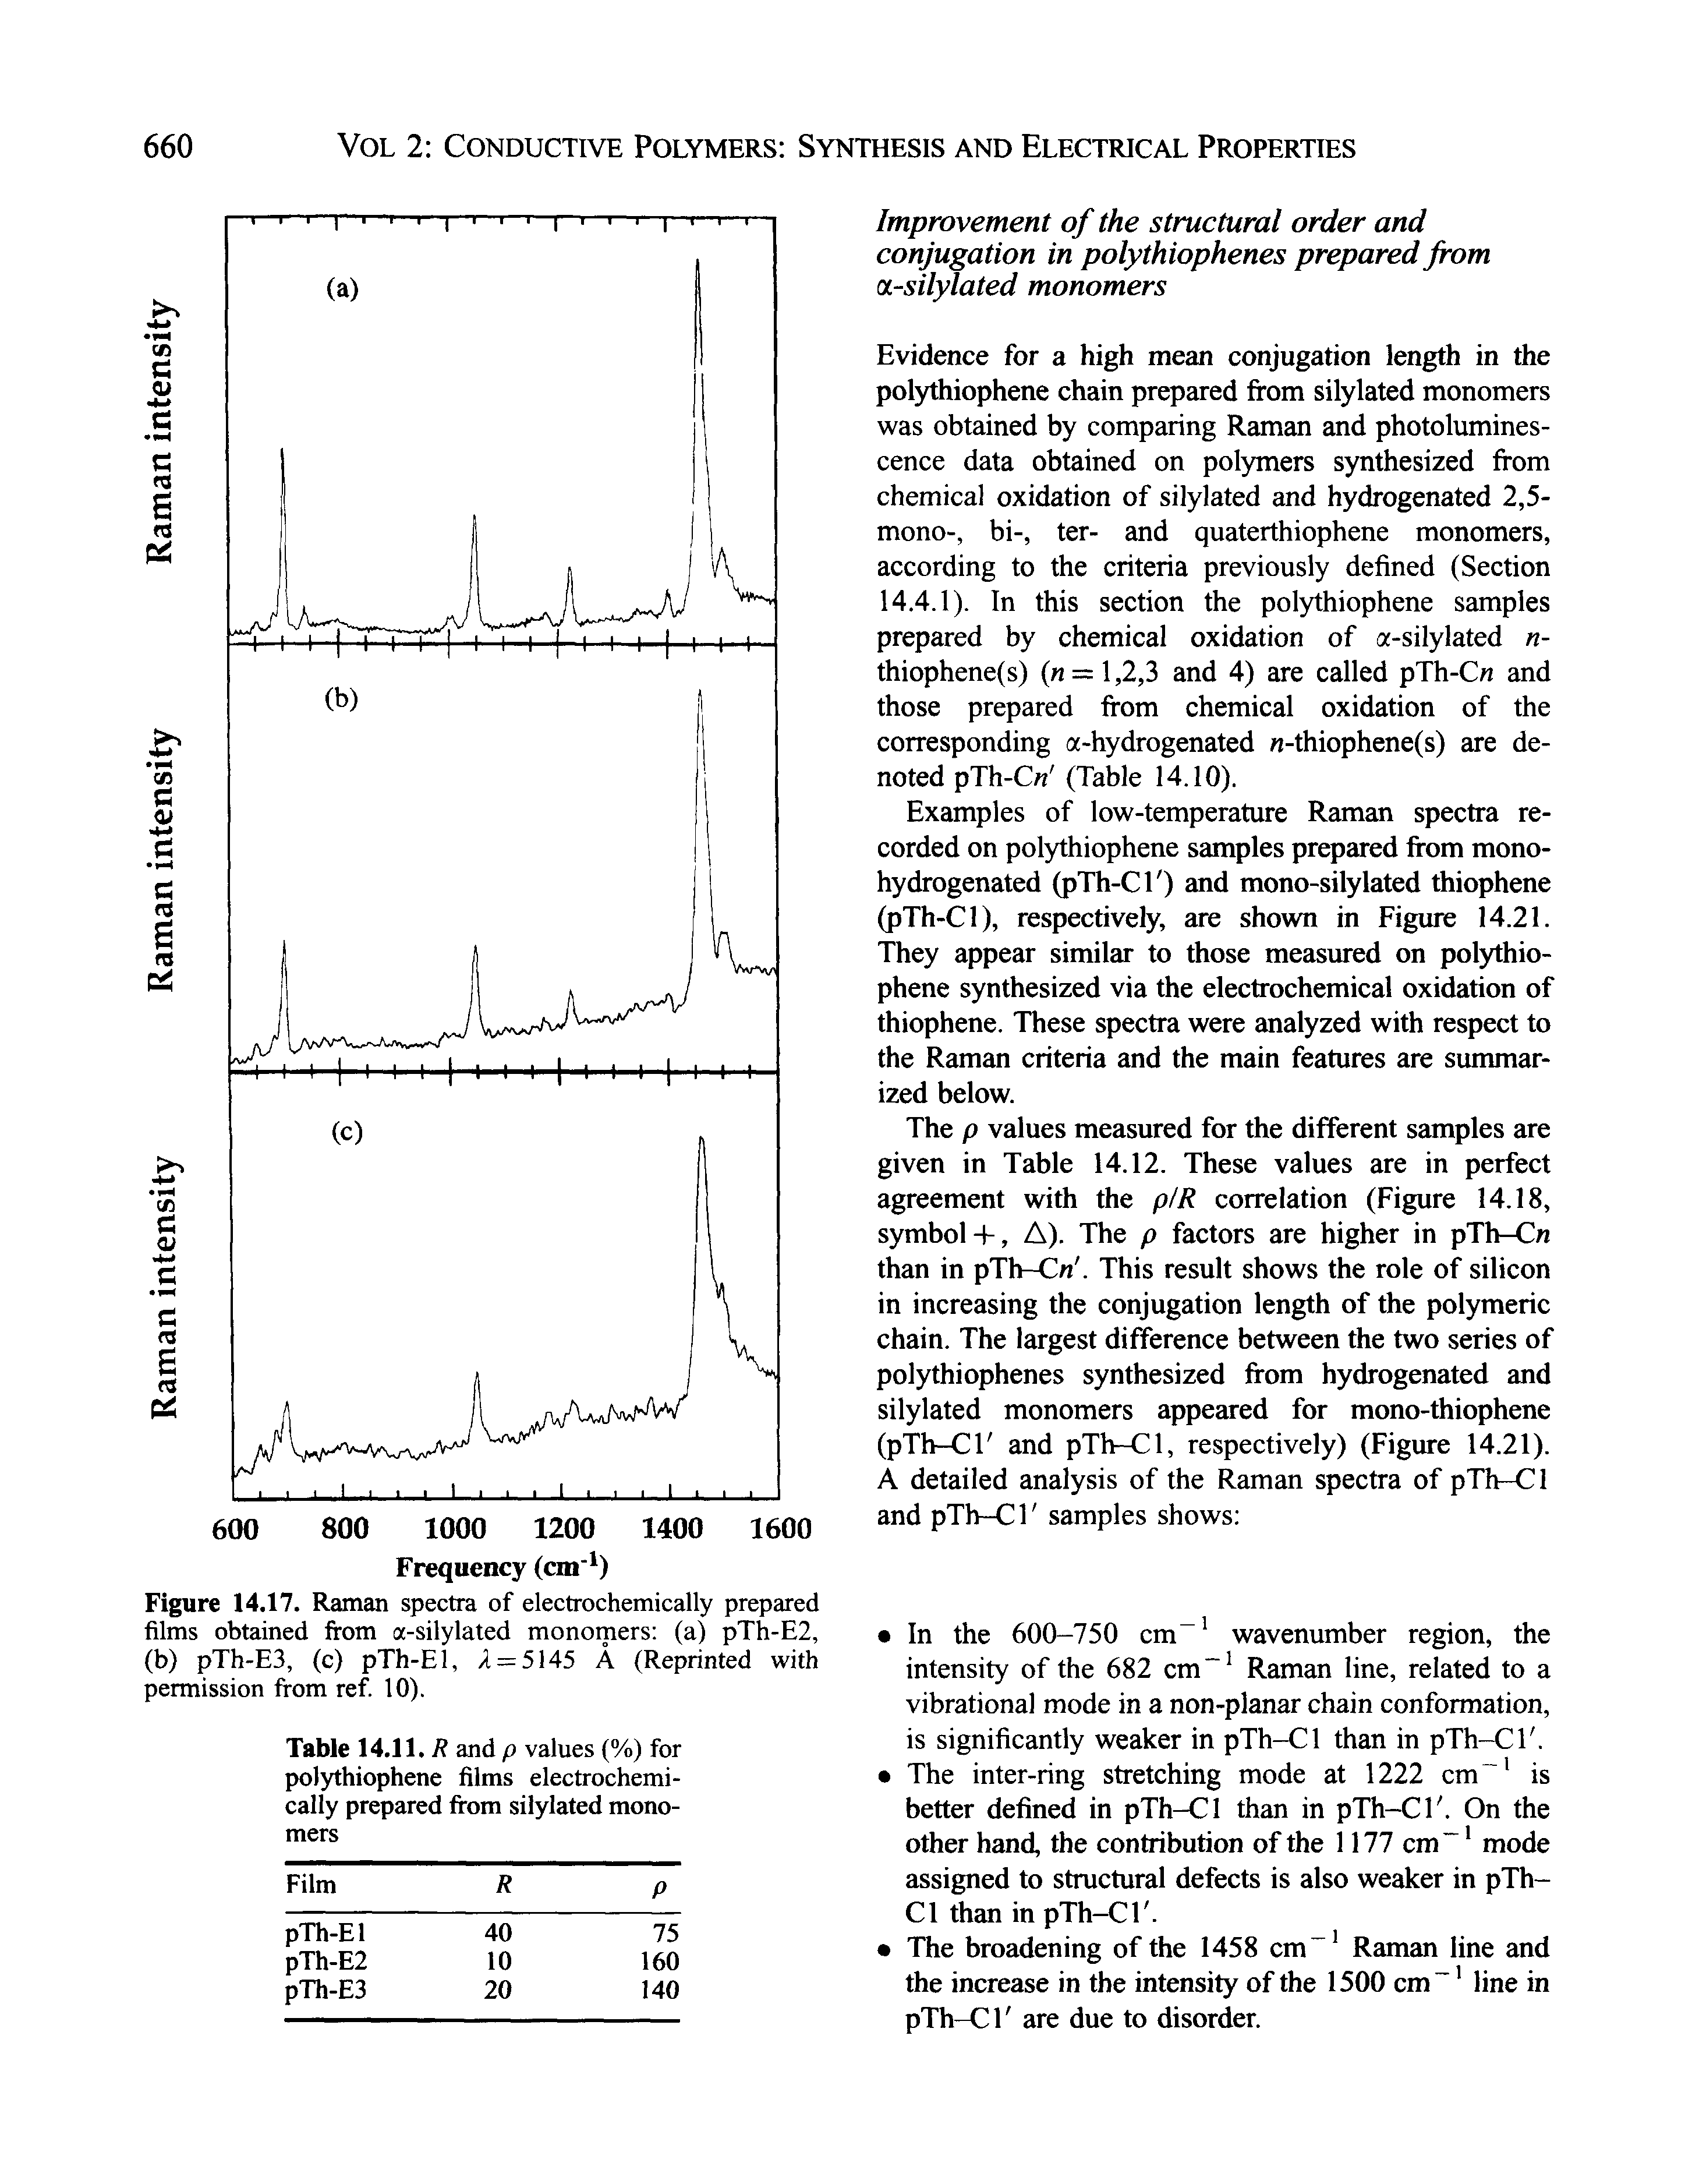 Figure 14.17. Raman spectra of electrochemically prepared films obtained Irom a-silylated monomers (a) pTh-E2, (b) pTh-E3, (c) pTh-El, A = 5145 A (Reprinted with permission from ref 10).